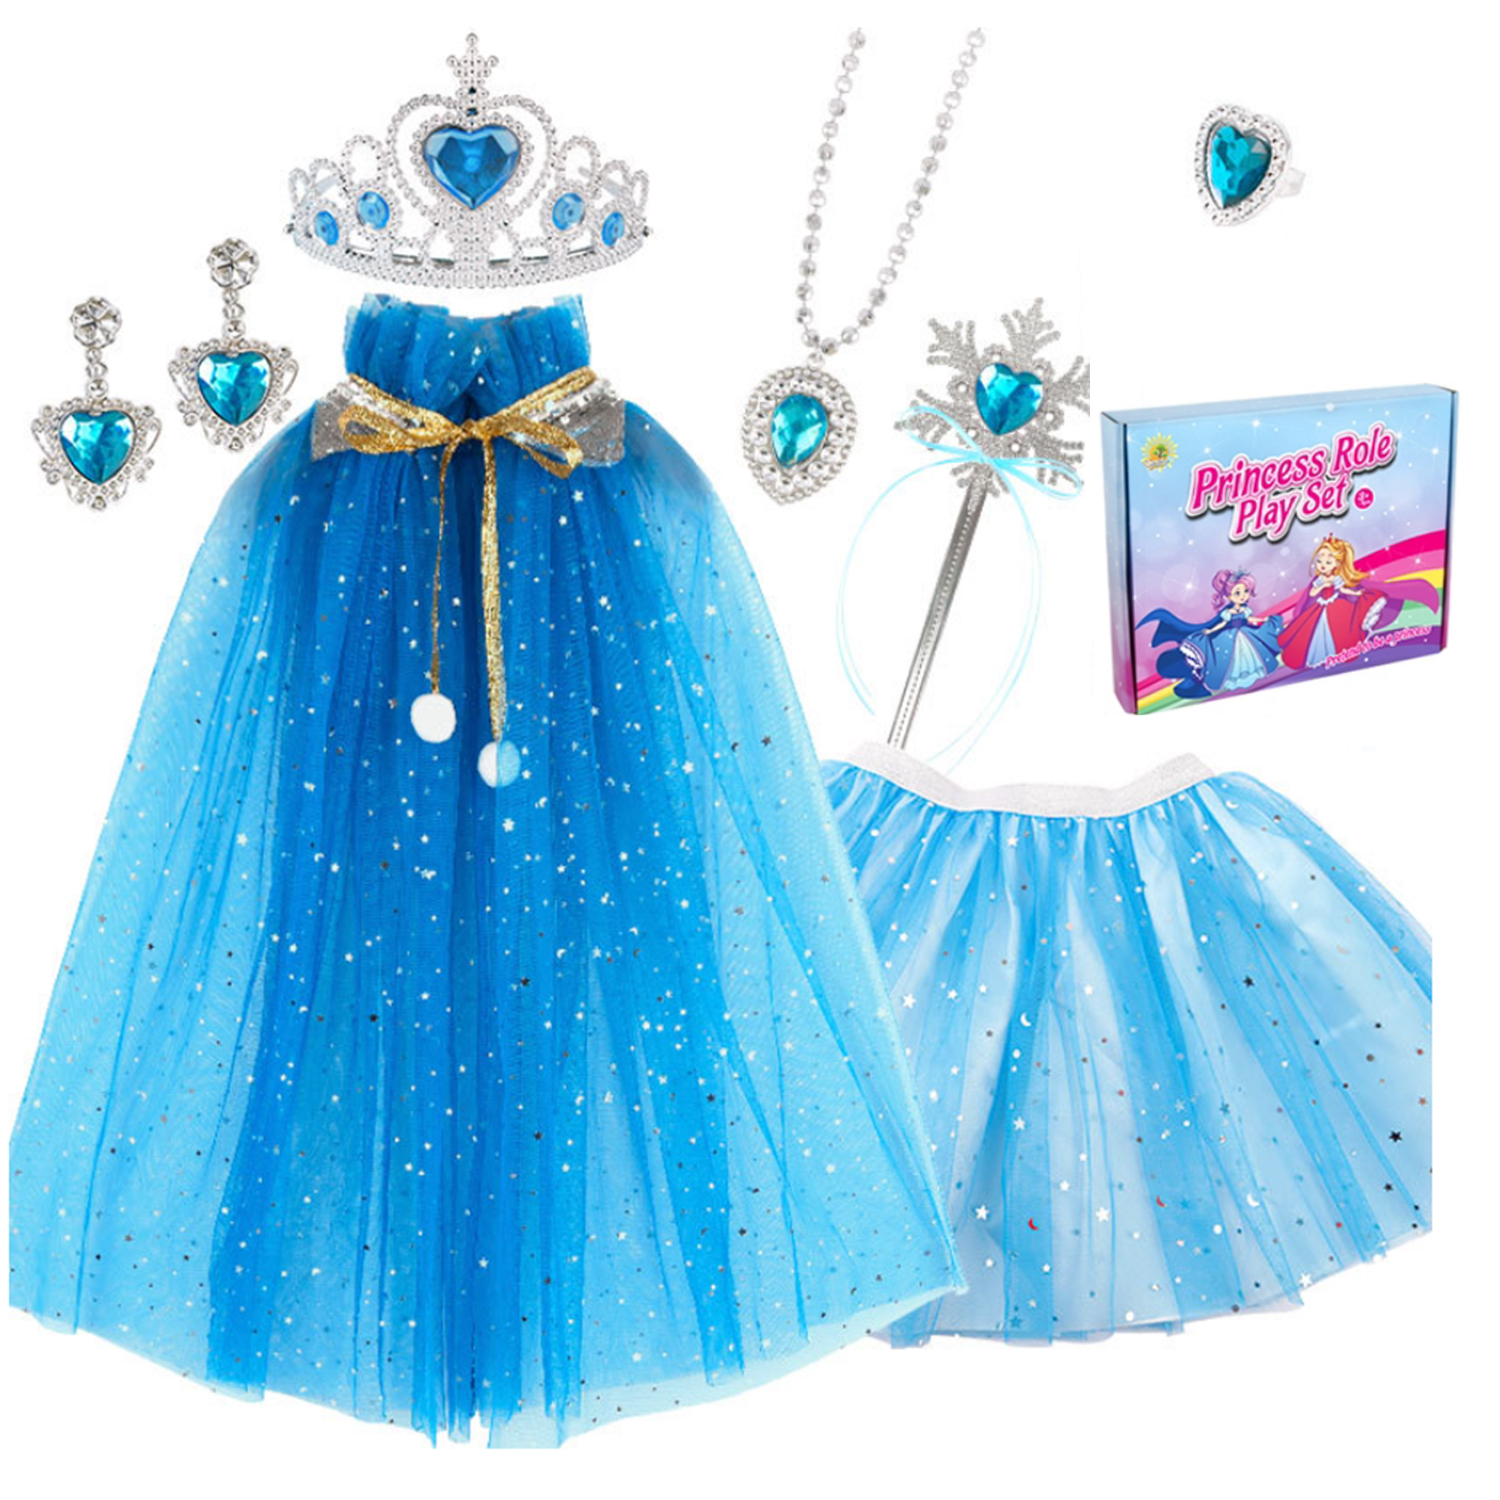 AOXTOY Dress-up Cosplay Toys for Girls, Princess Dress Up Clothes Cape Skirt Set, Pretend Play Princess Dress Cloak Jewelry Crown Wand - image 1 of 5